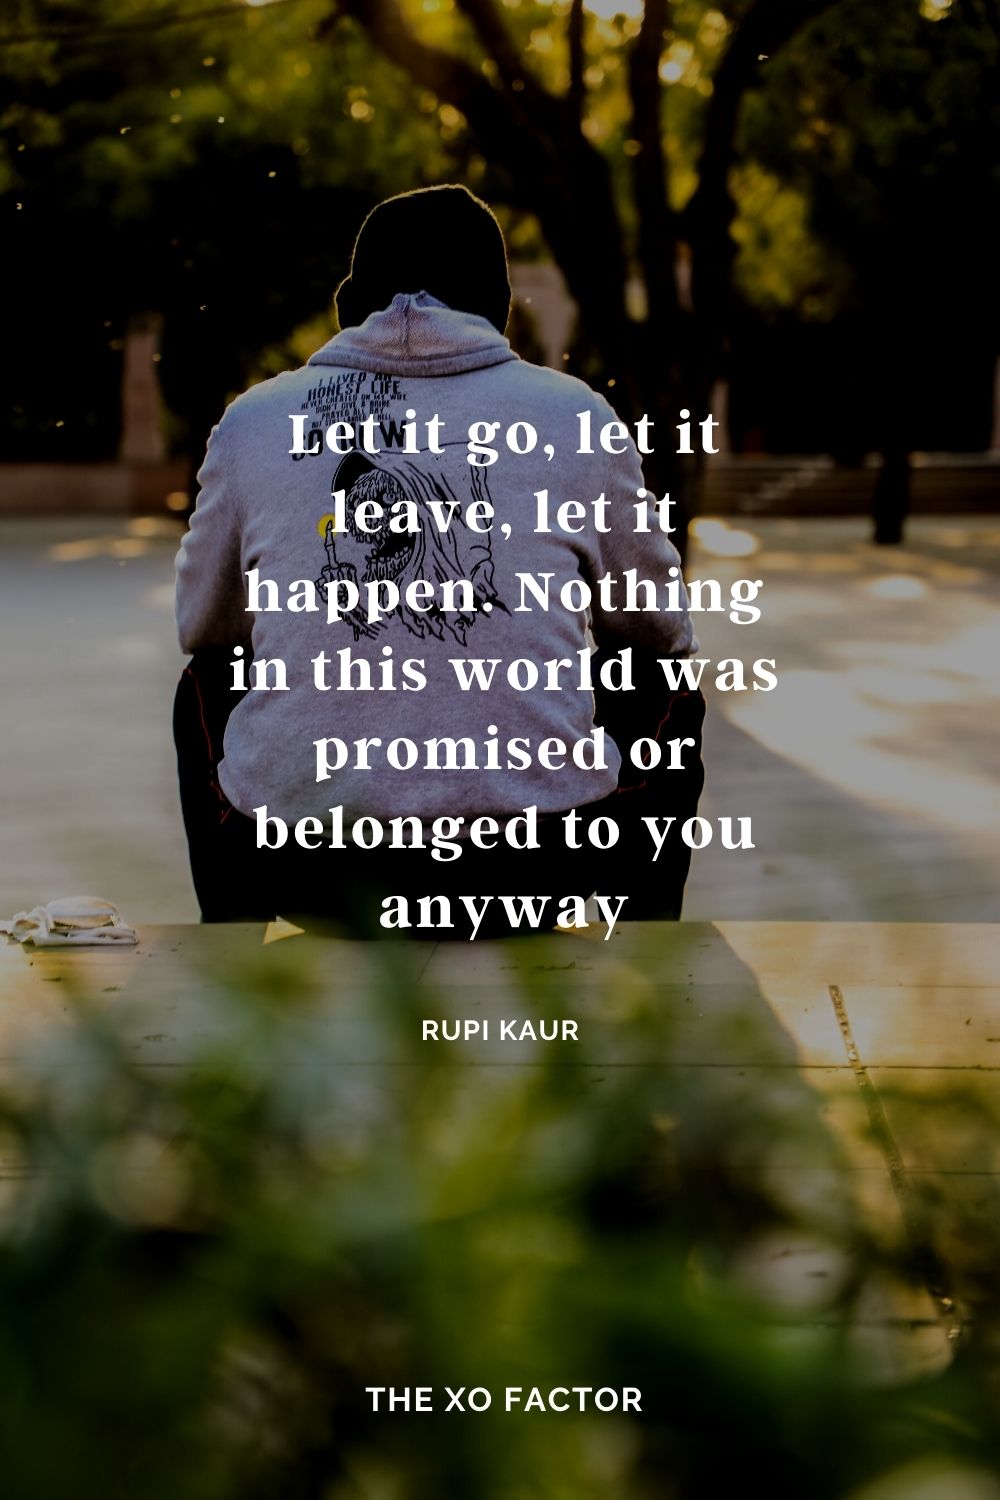 Let it go, let it leave, let it happen. Nothing in this world was promised or belonged to you anyway. Rupi Kaur